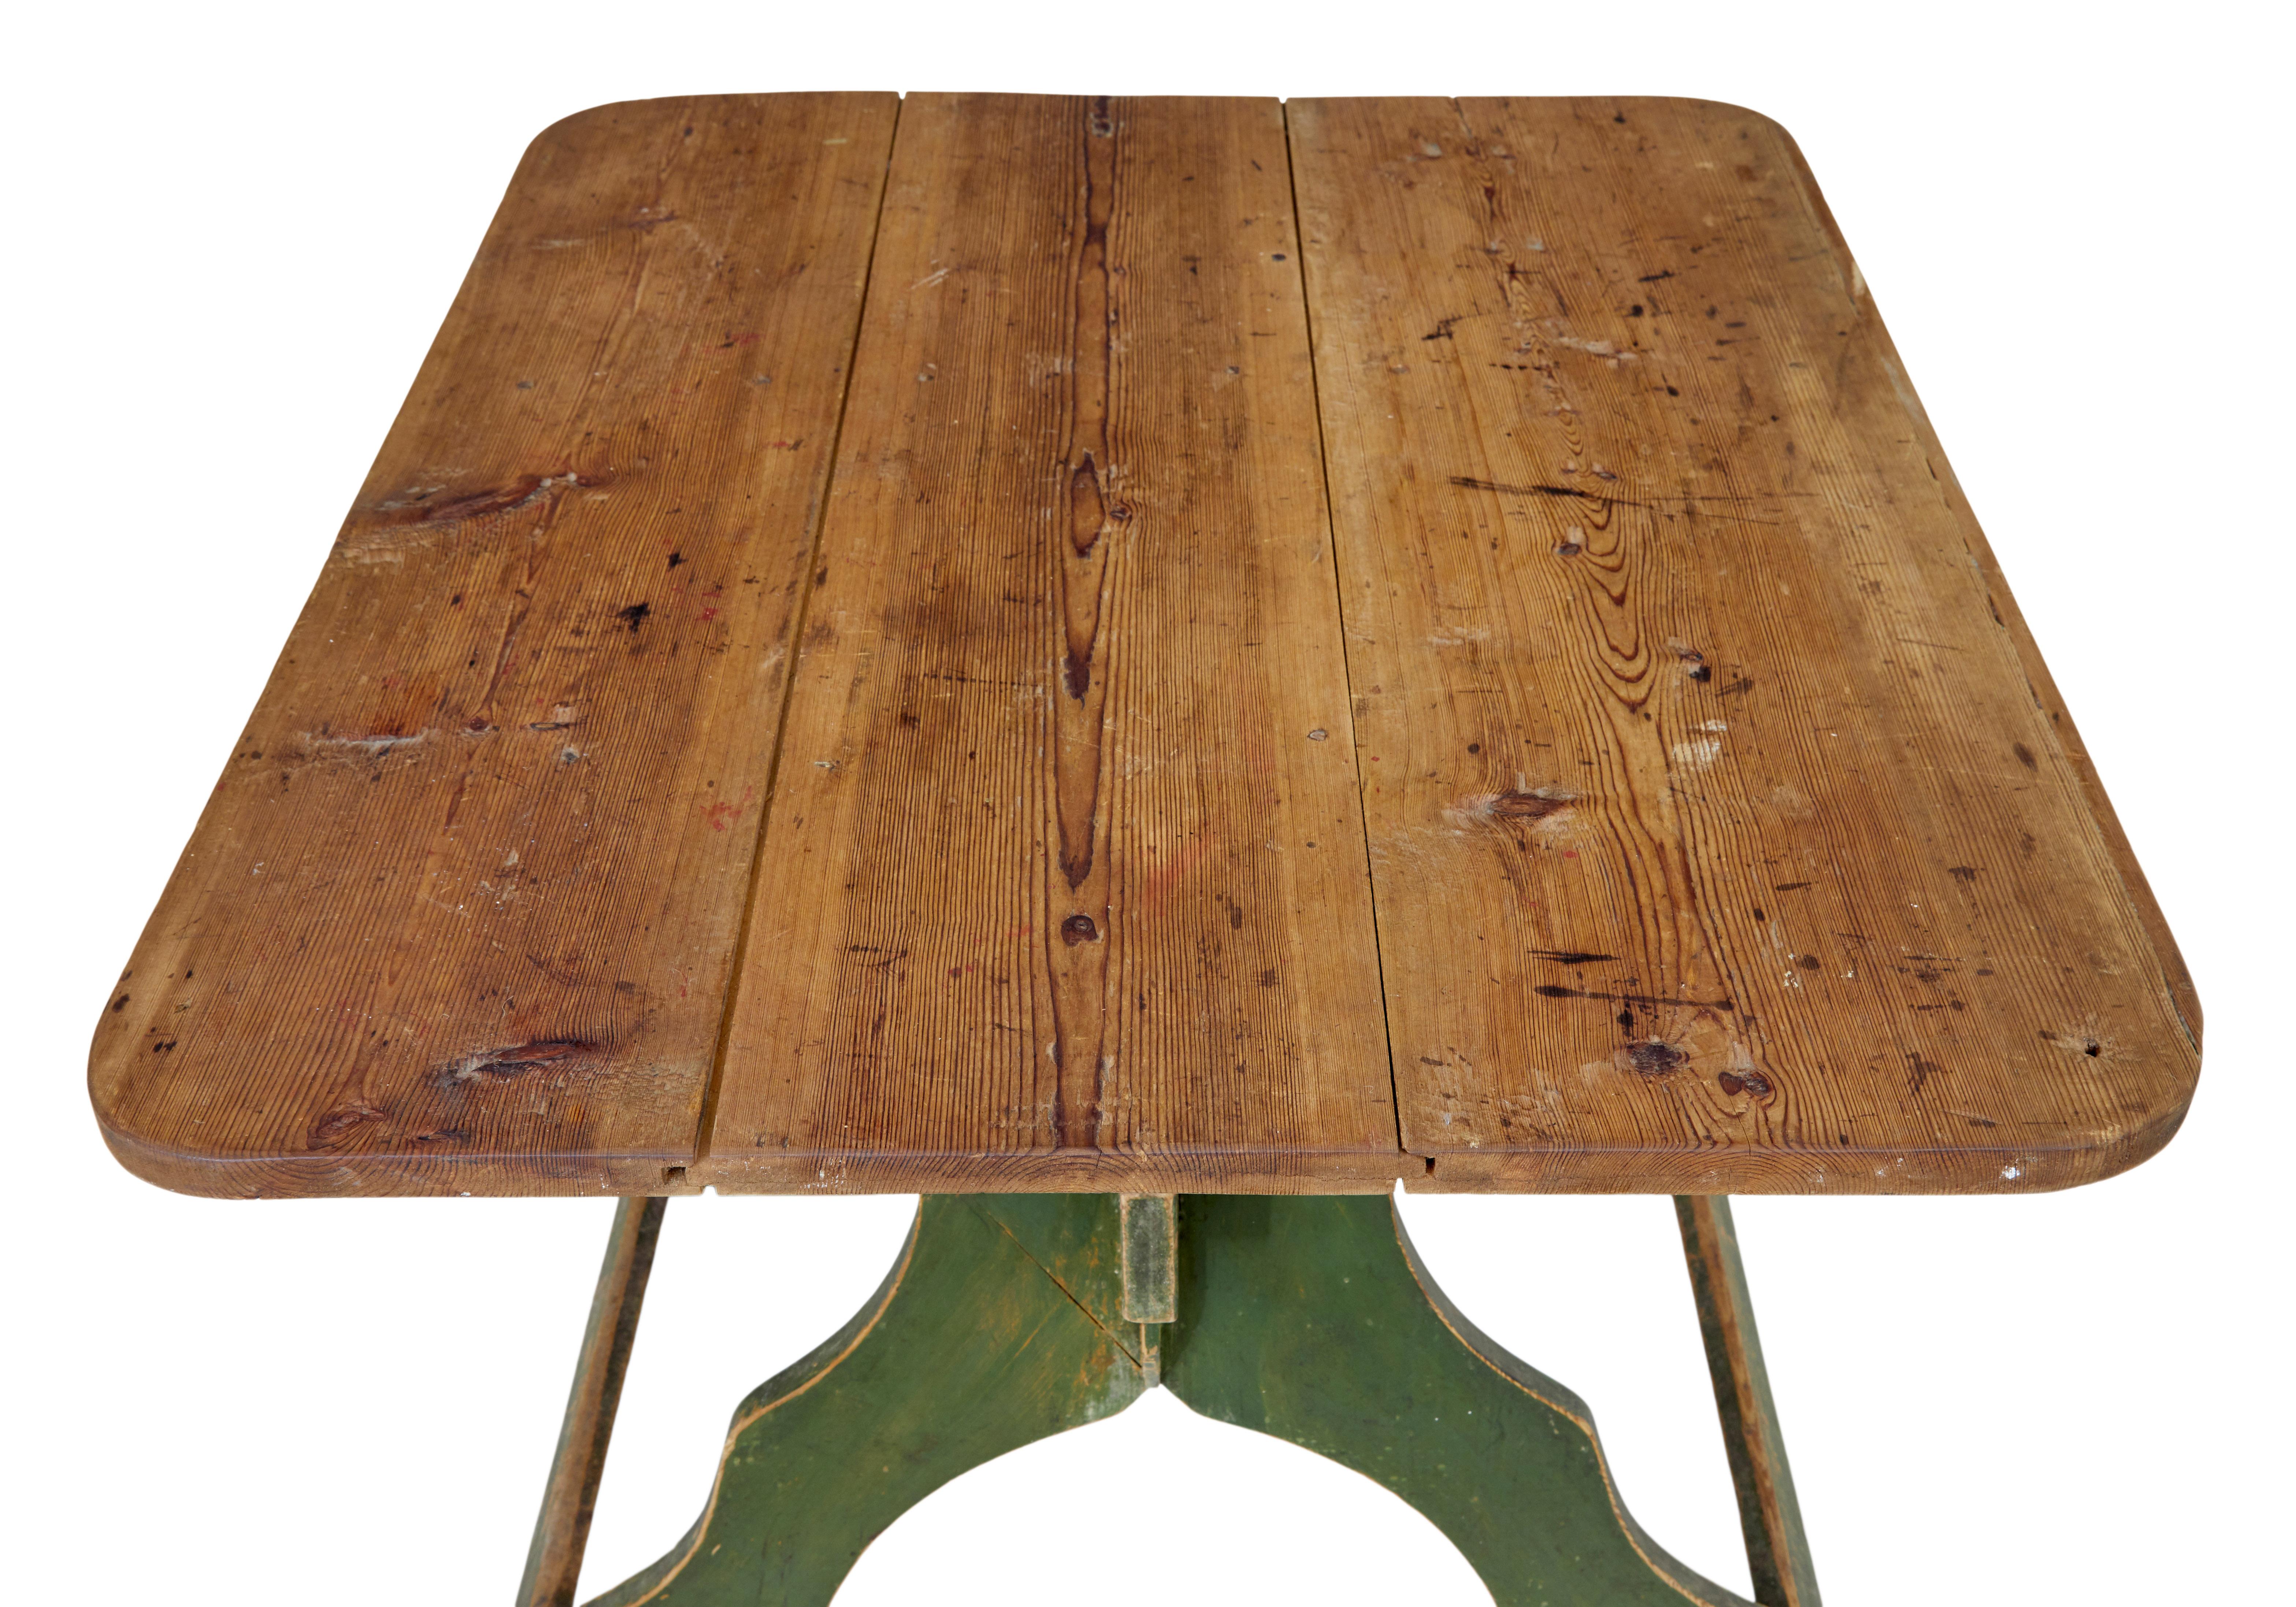 Hand-Crafted 19th Century Painted Pine Swedish Trestle Table For Sale